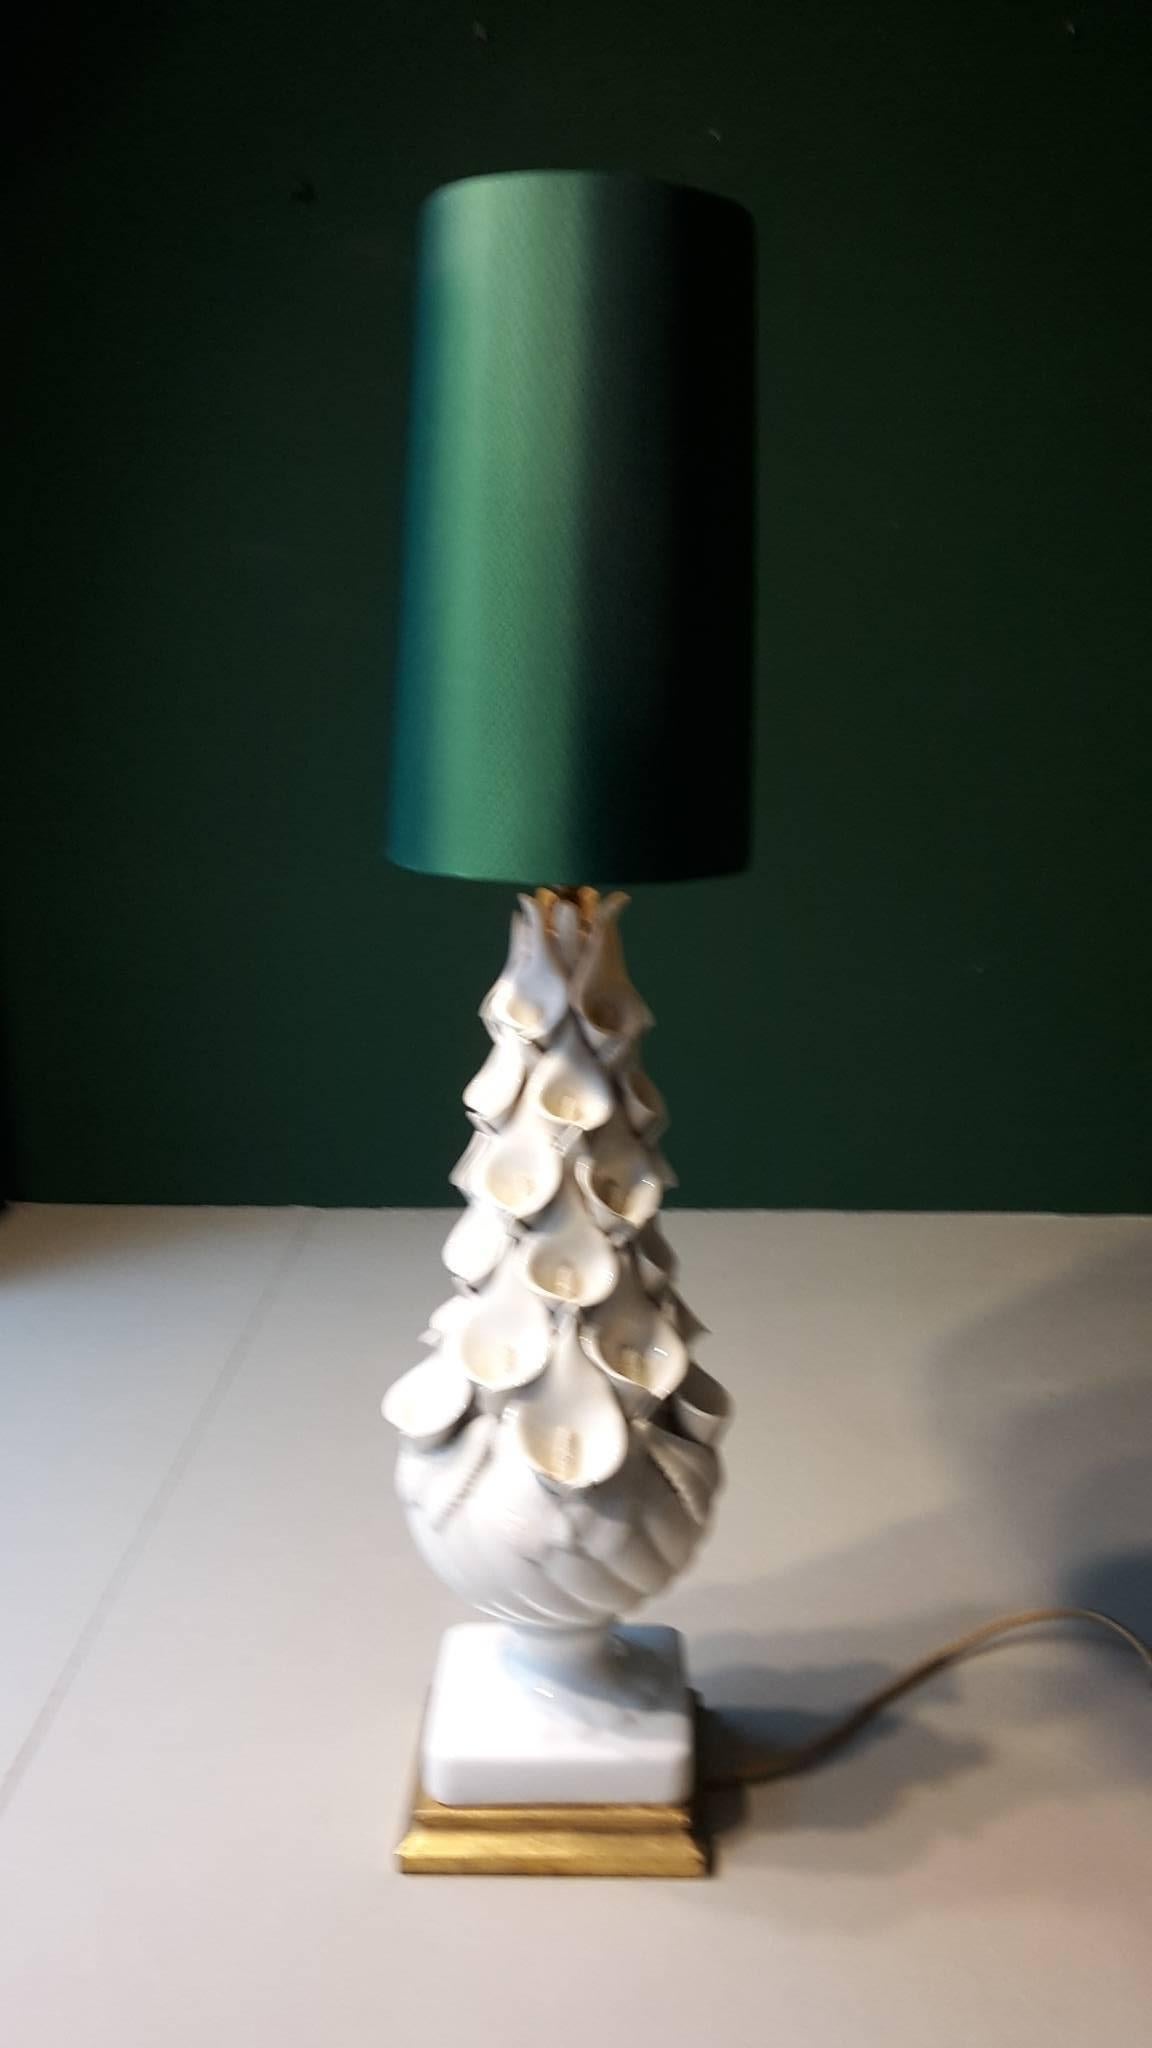 20th century white Spanish table lamp with calla lilly pattern made of ceramic with an oval green shade. From Valencia.